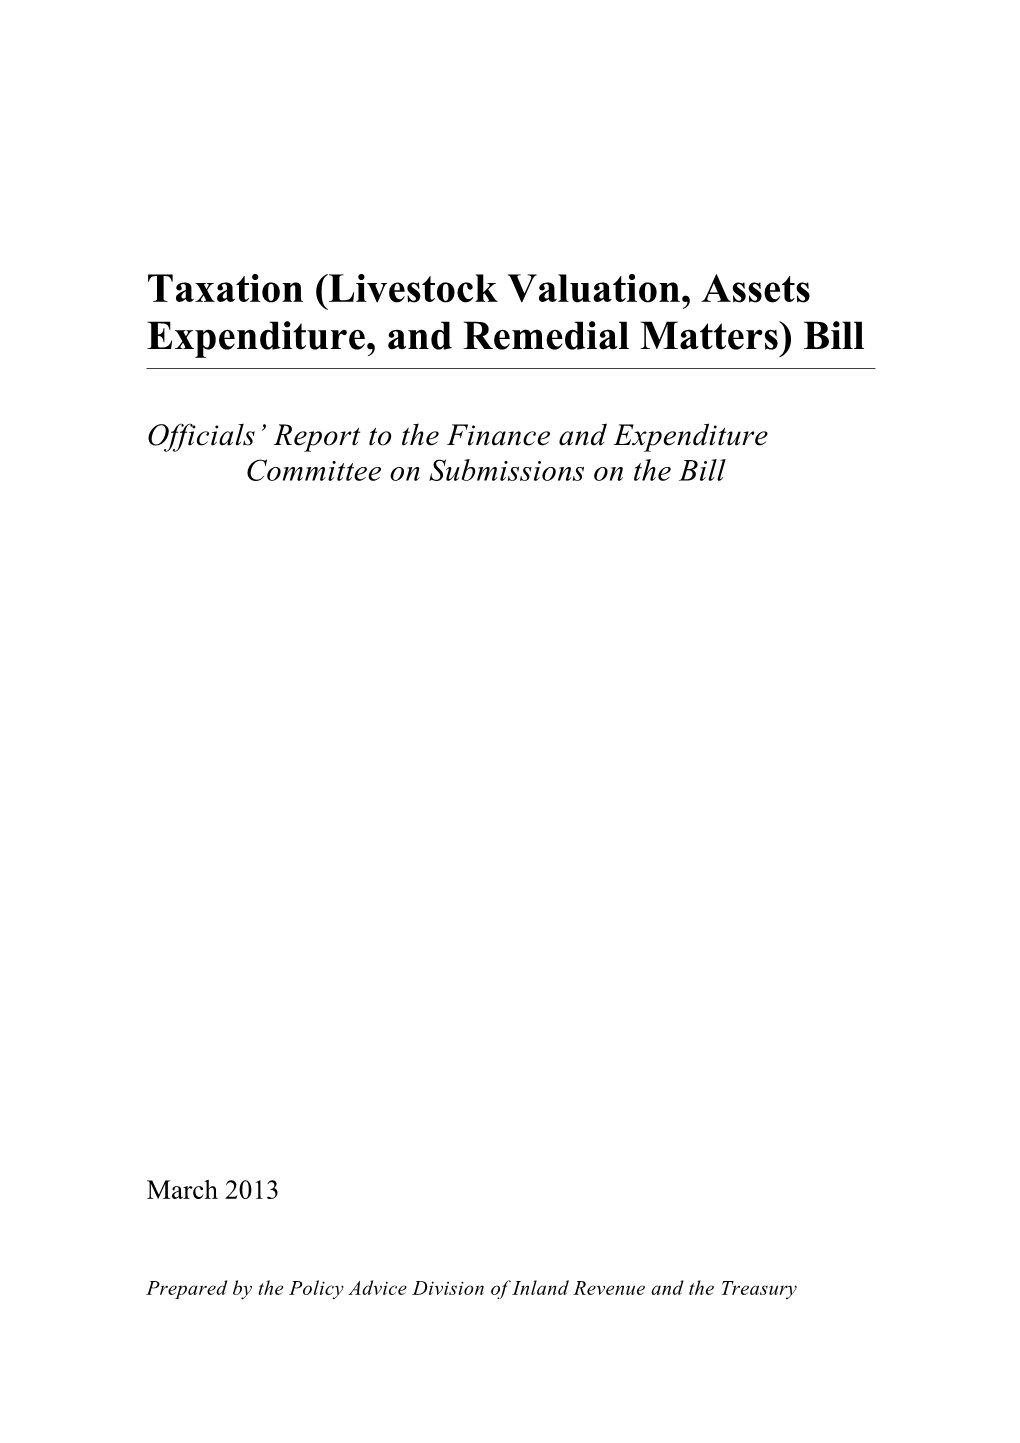 Taxation (Livestock Valuation, Assets Expenditure, and Remedial Matters) Bill - Officials'